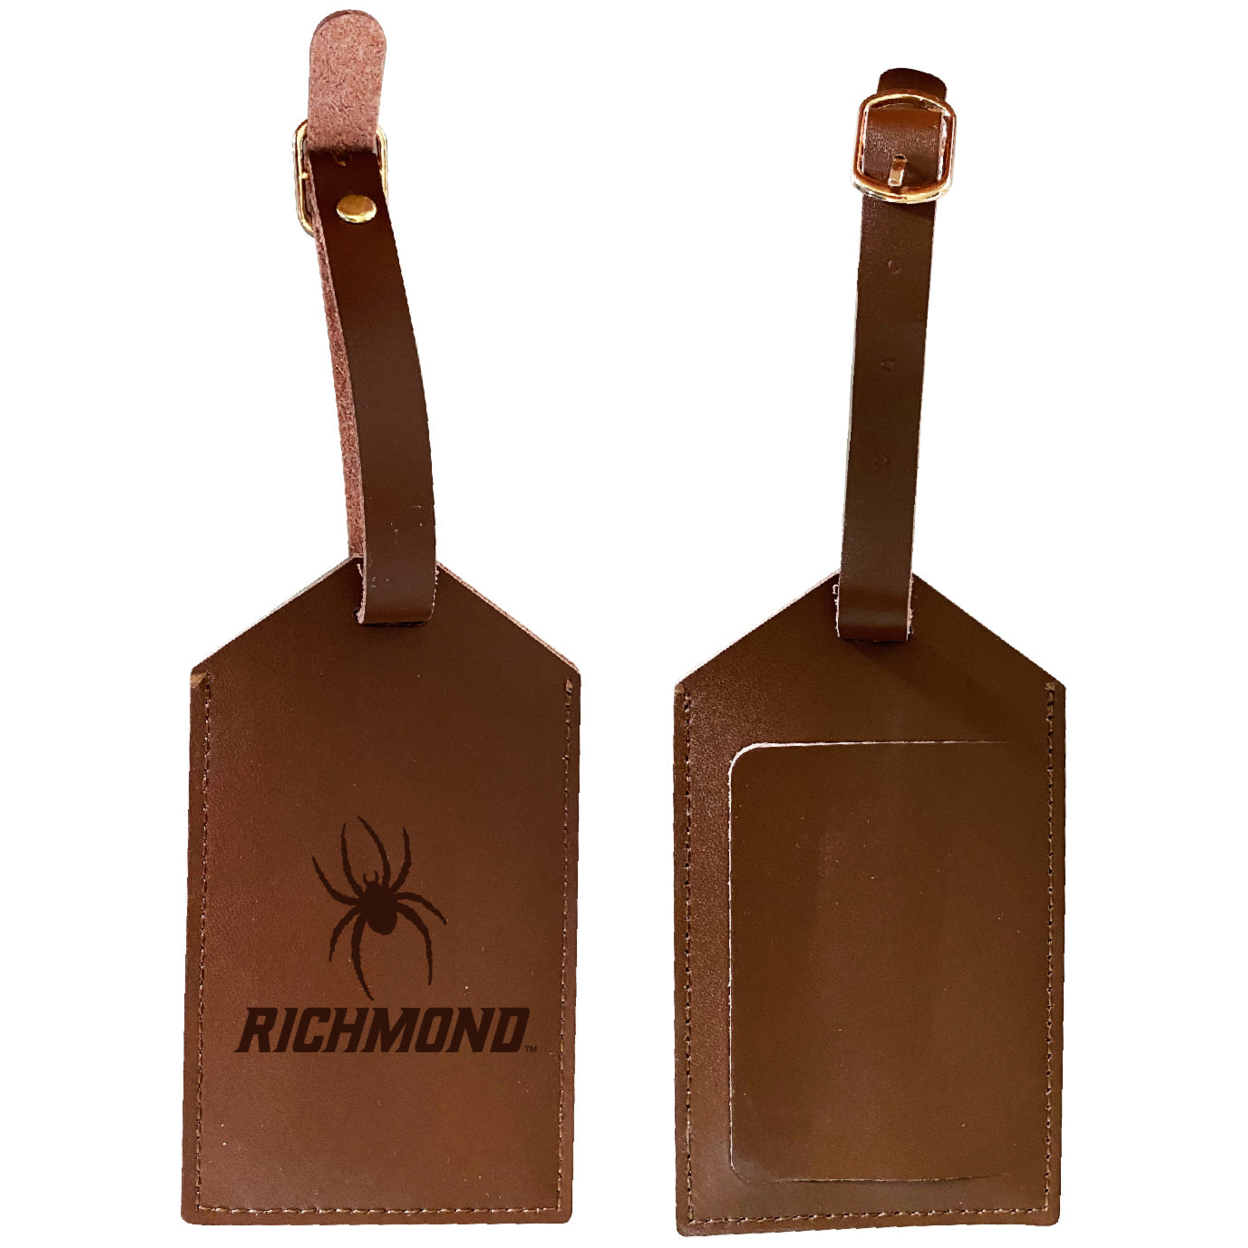 Richmond Spiders Leather Luggage Tag Engraved